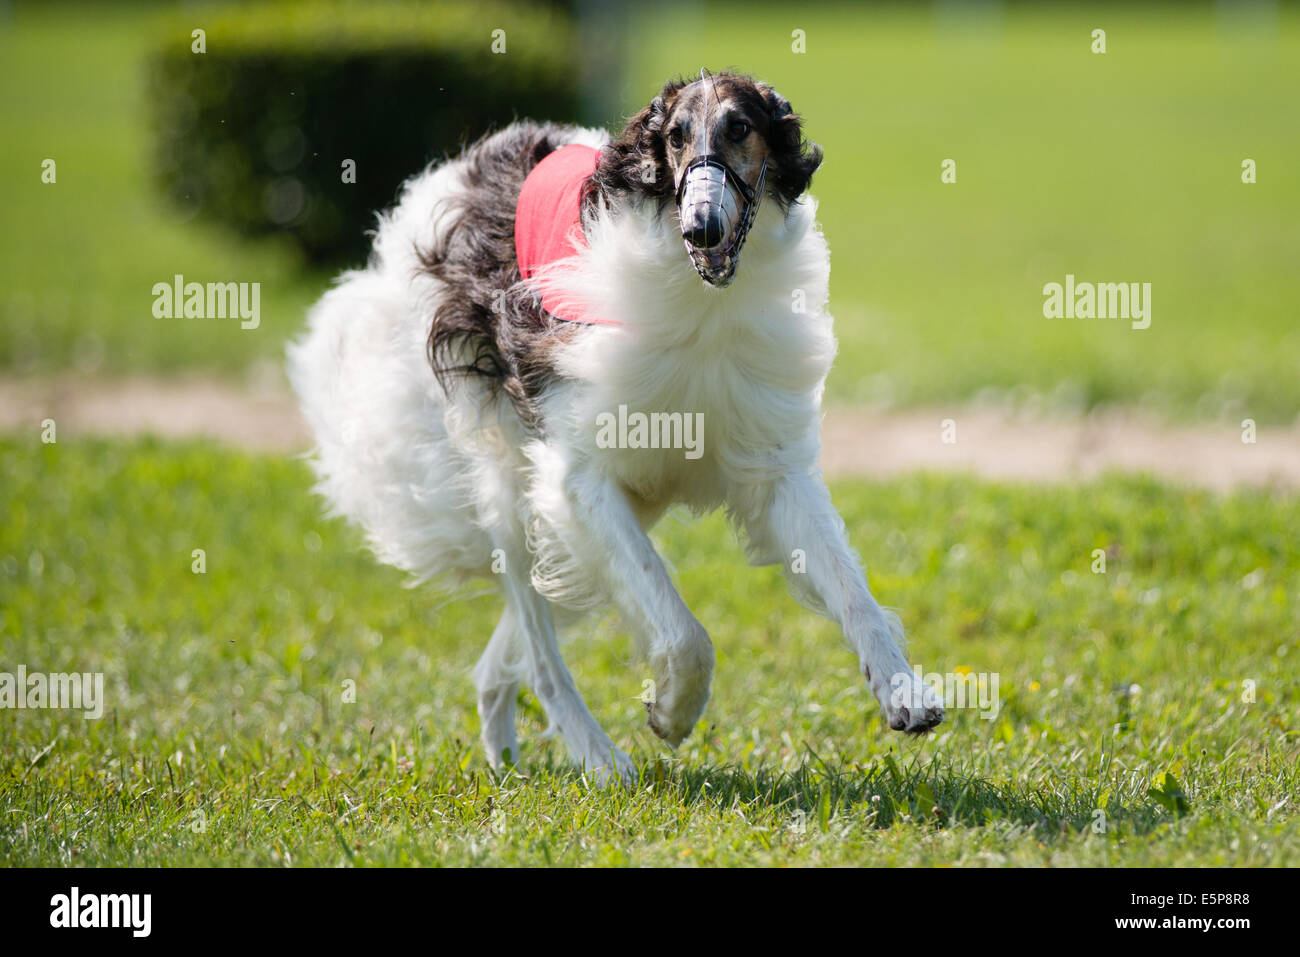 Dog racing in coursing competition Stock Photo